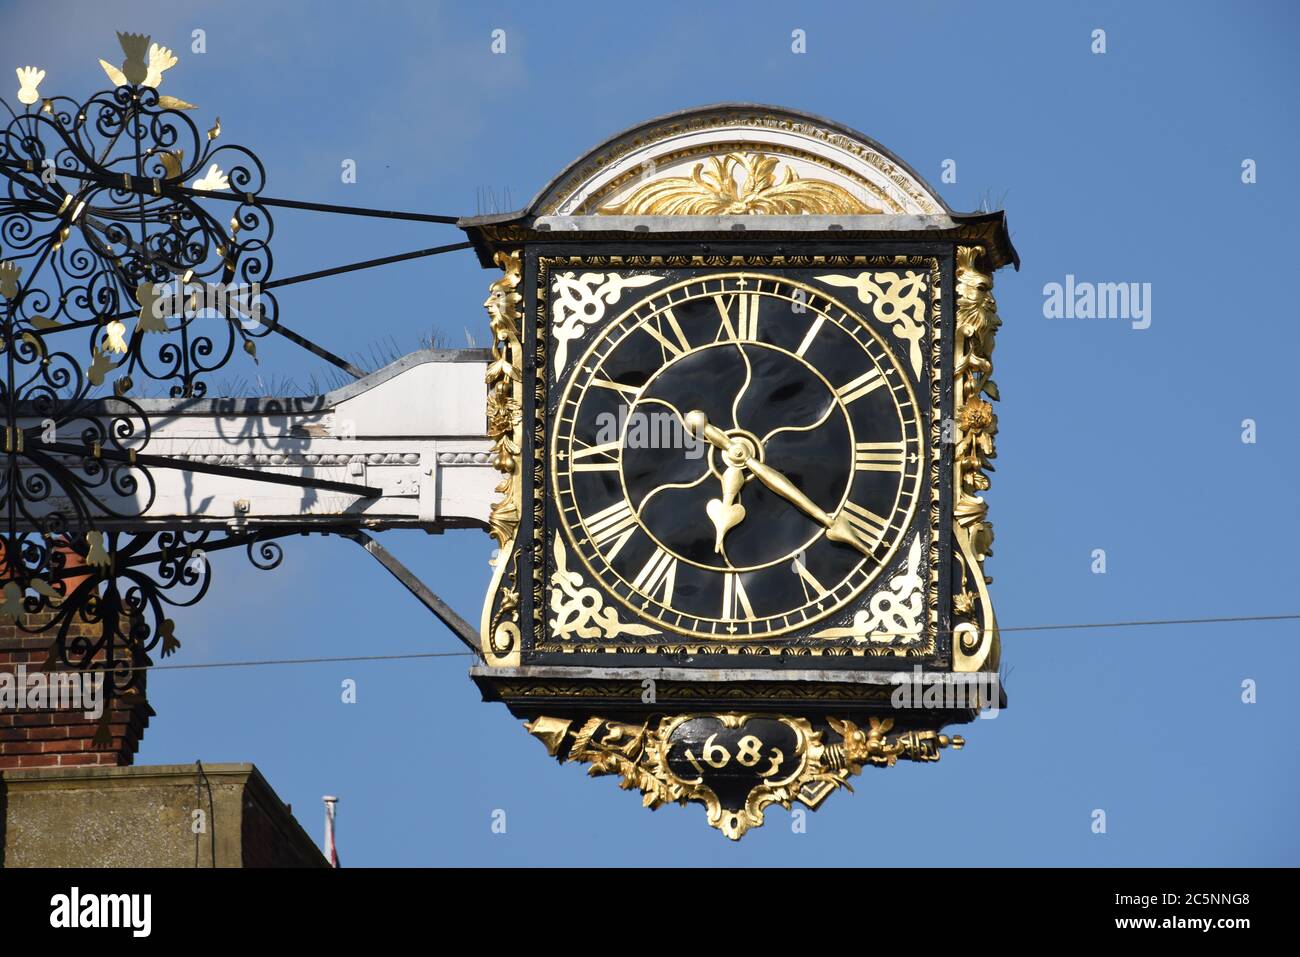 Guildford's famous clock stands out against a clear blue sky on a beautiful mid-summer day in the English county of Surrey Stock Photo